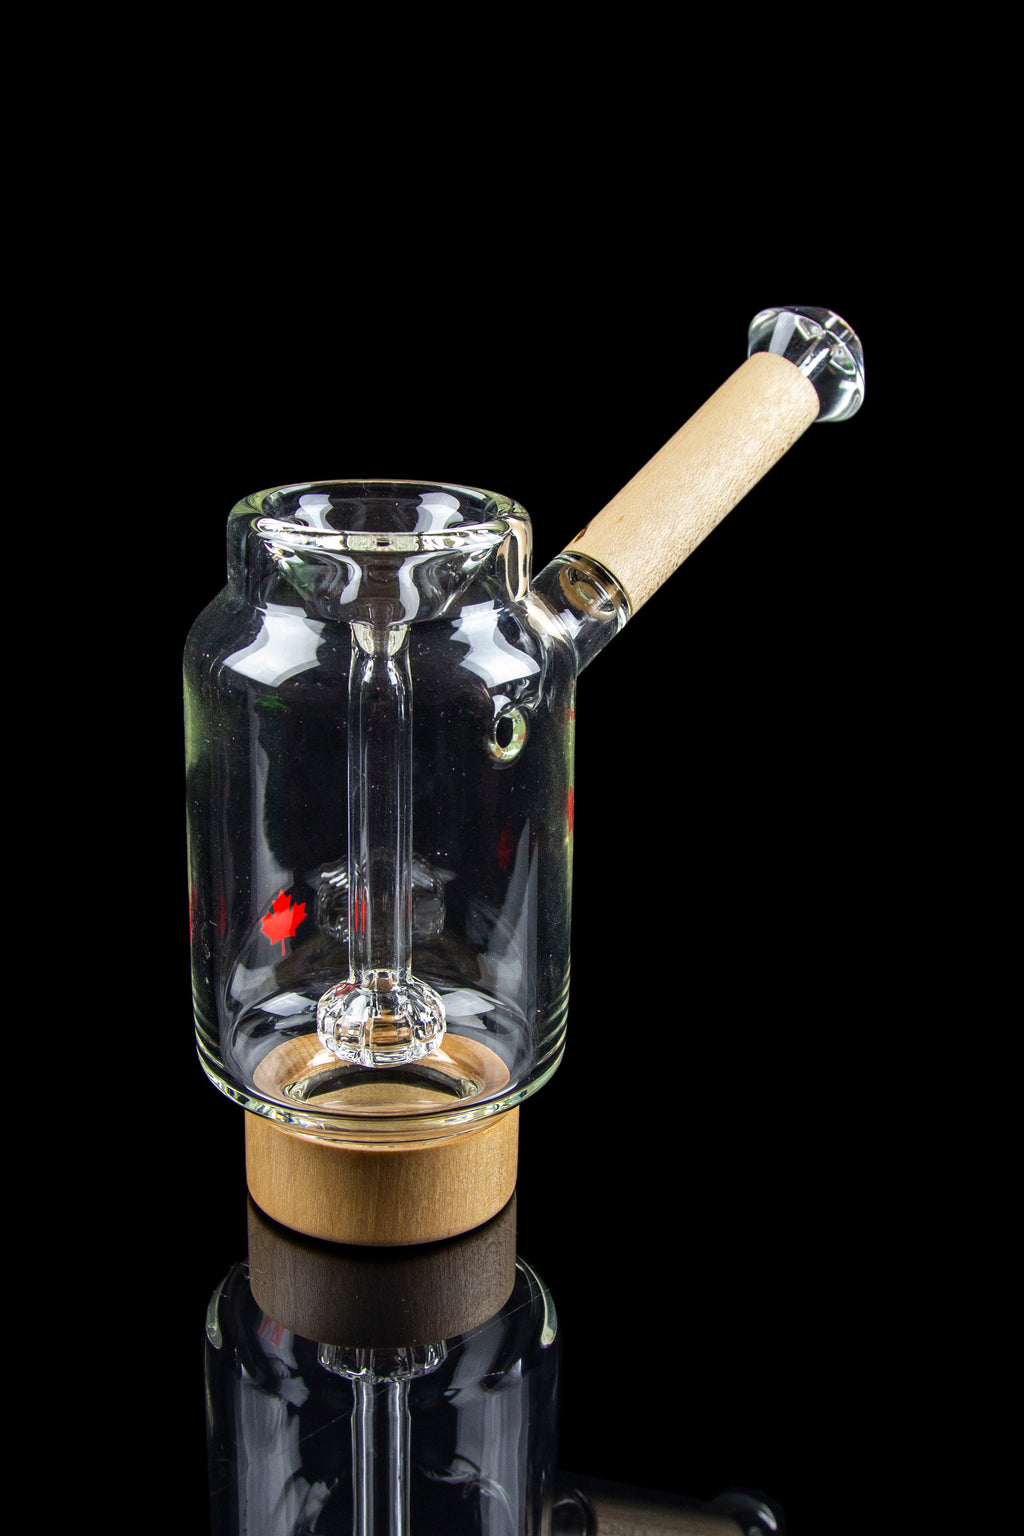 Canada Puffin Arctic Bubbler - Handcrafted Maple Wood Bubbler